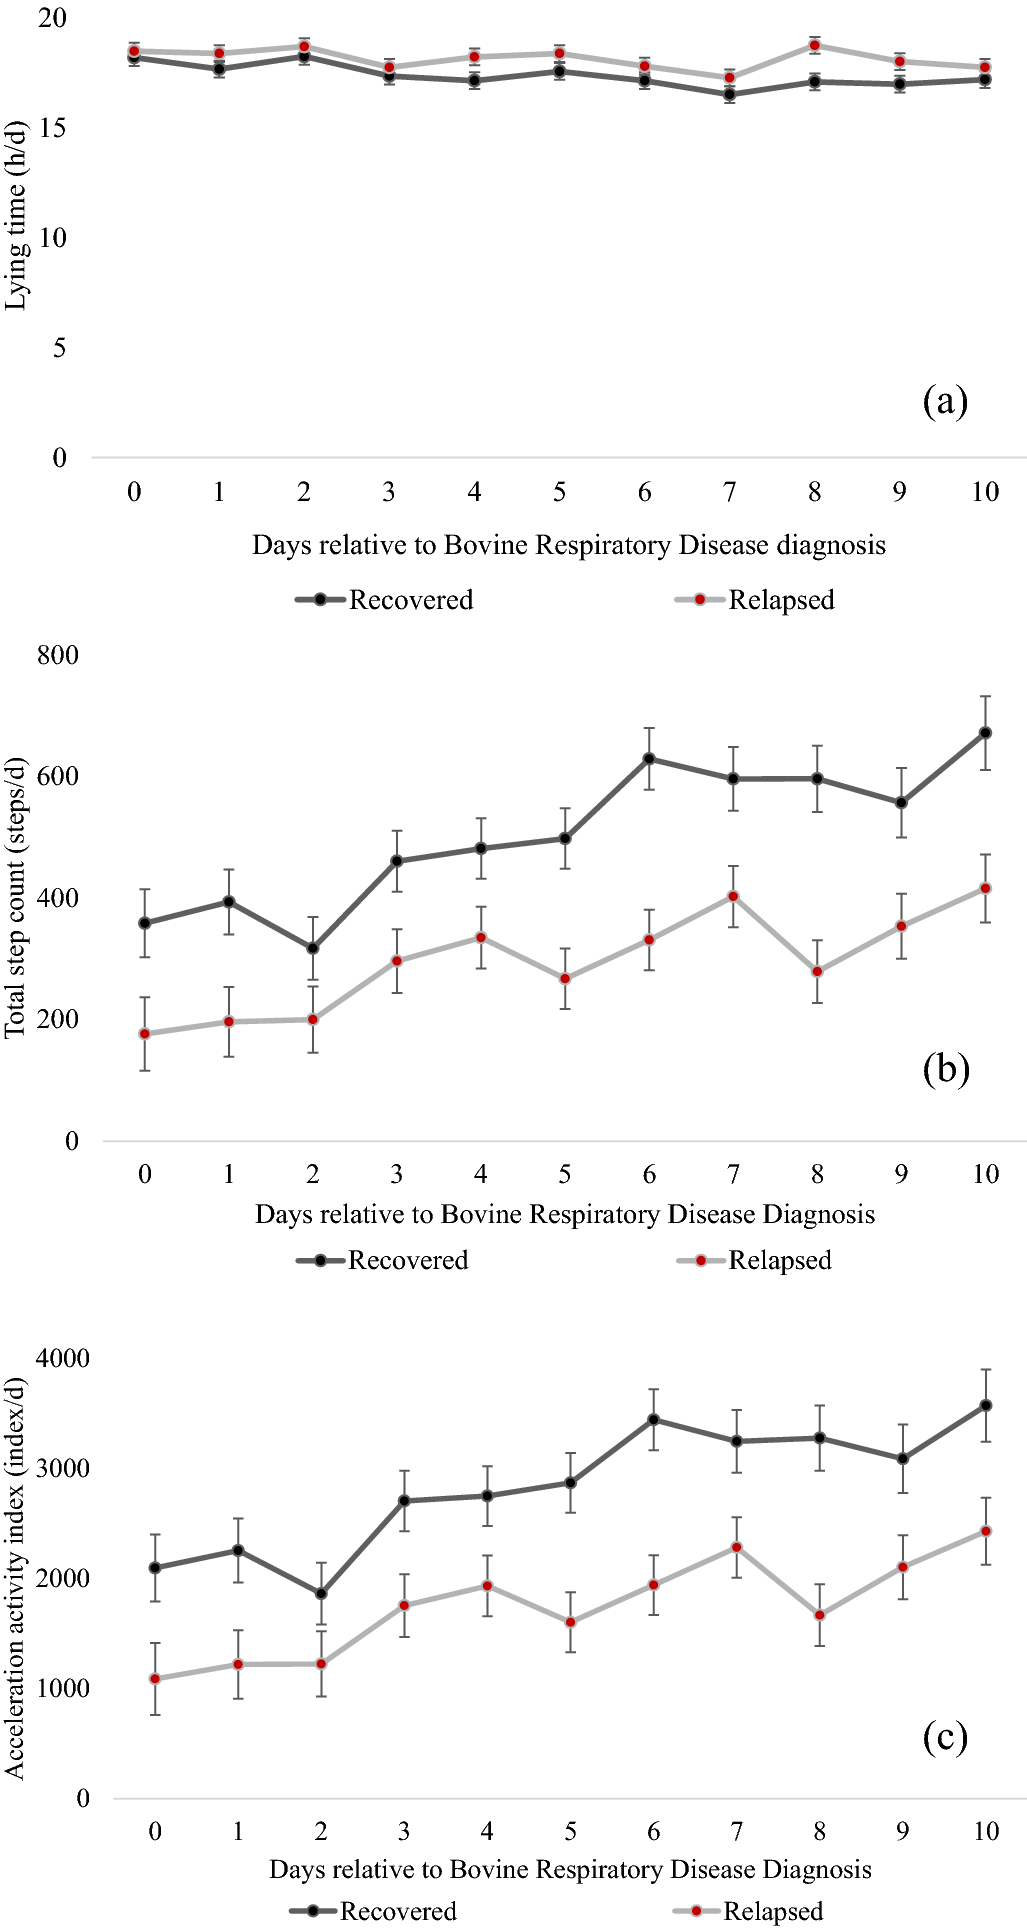 Feeding behavior and activity levels are associated with recovery status in  dairy calves treated with antimicrobials for Bovine Respiratory Disease |  Scientific Reports